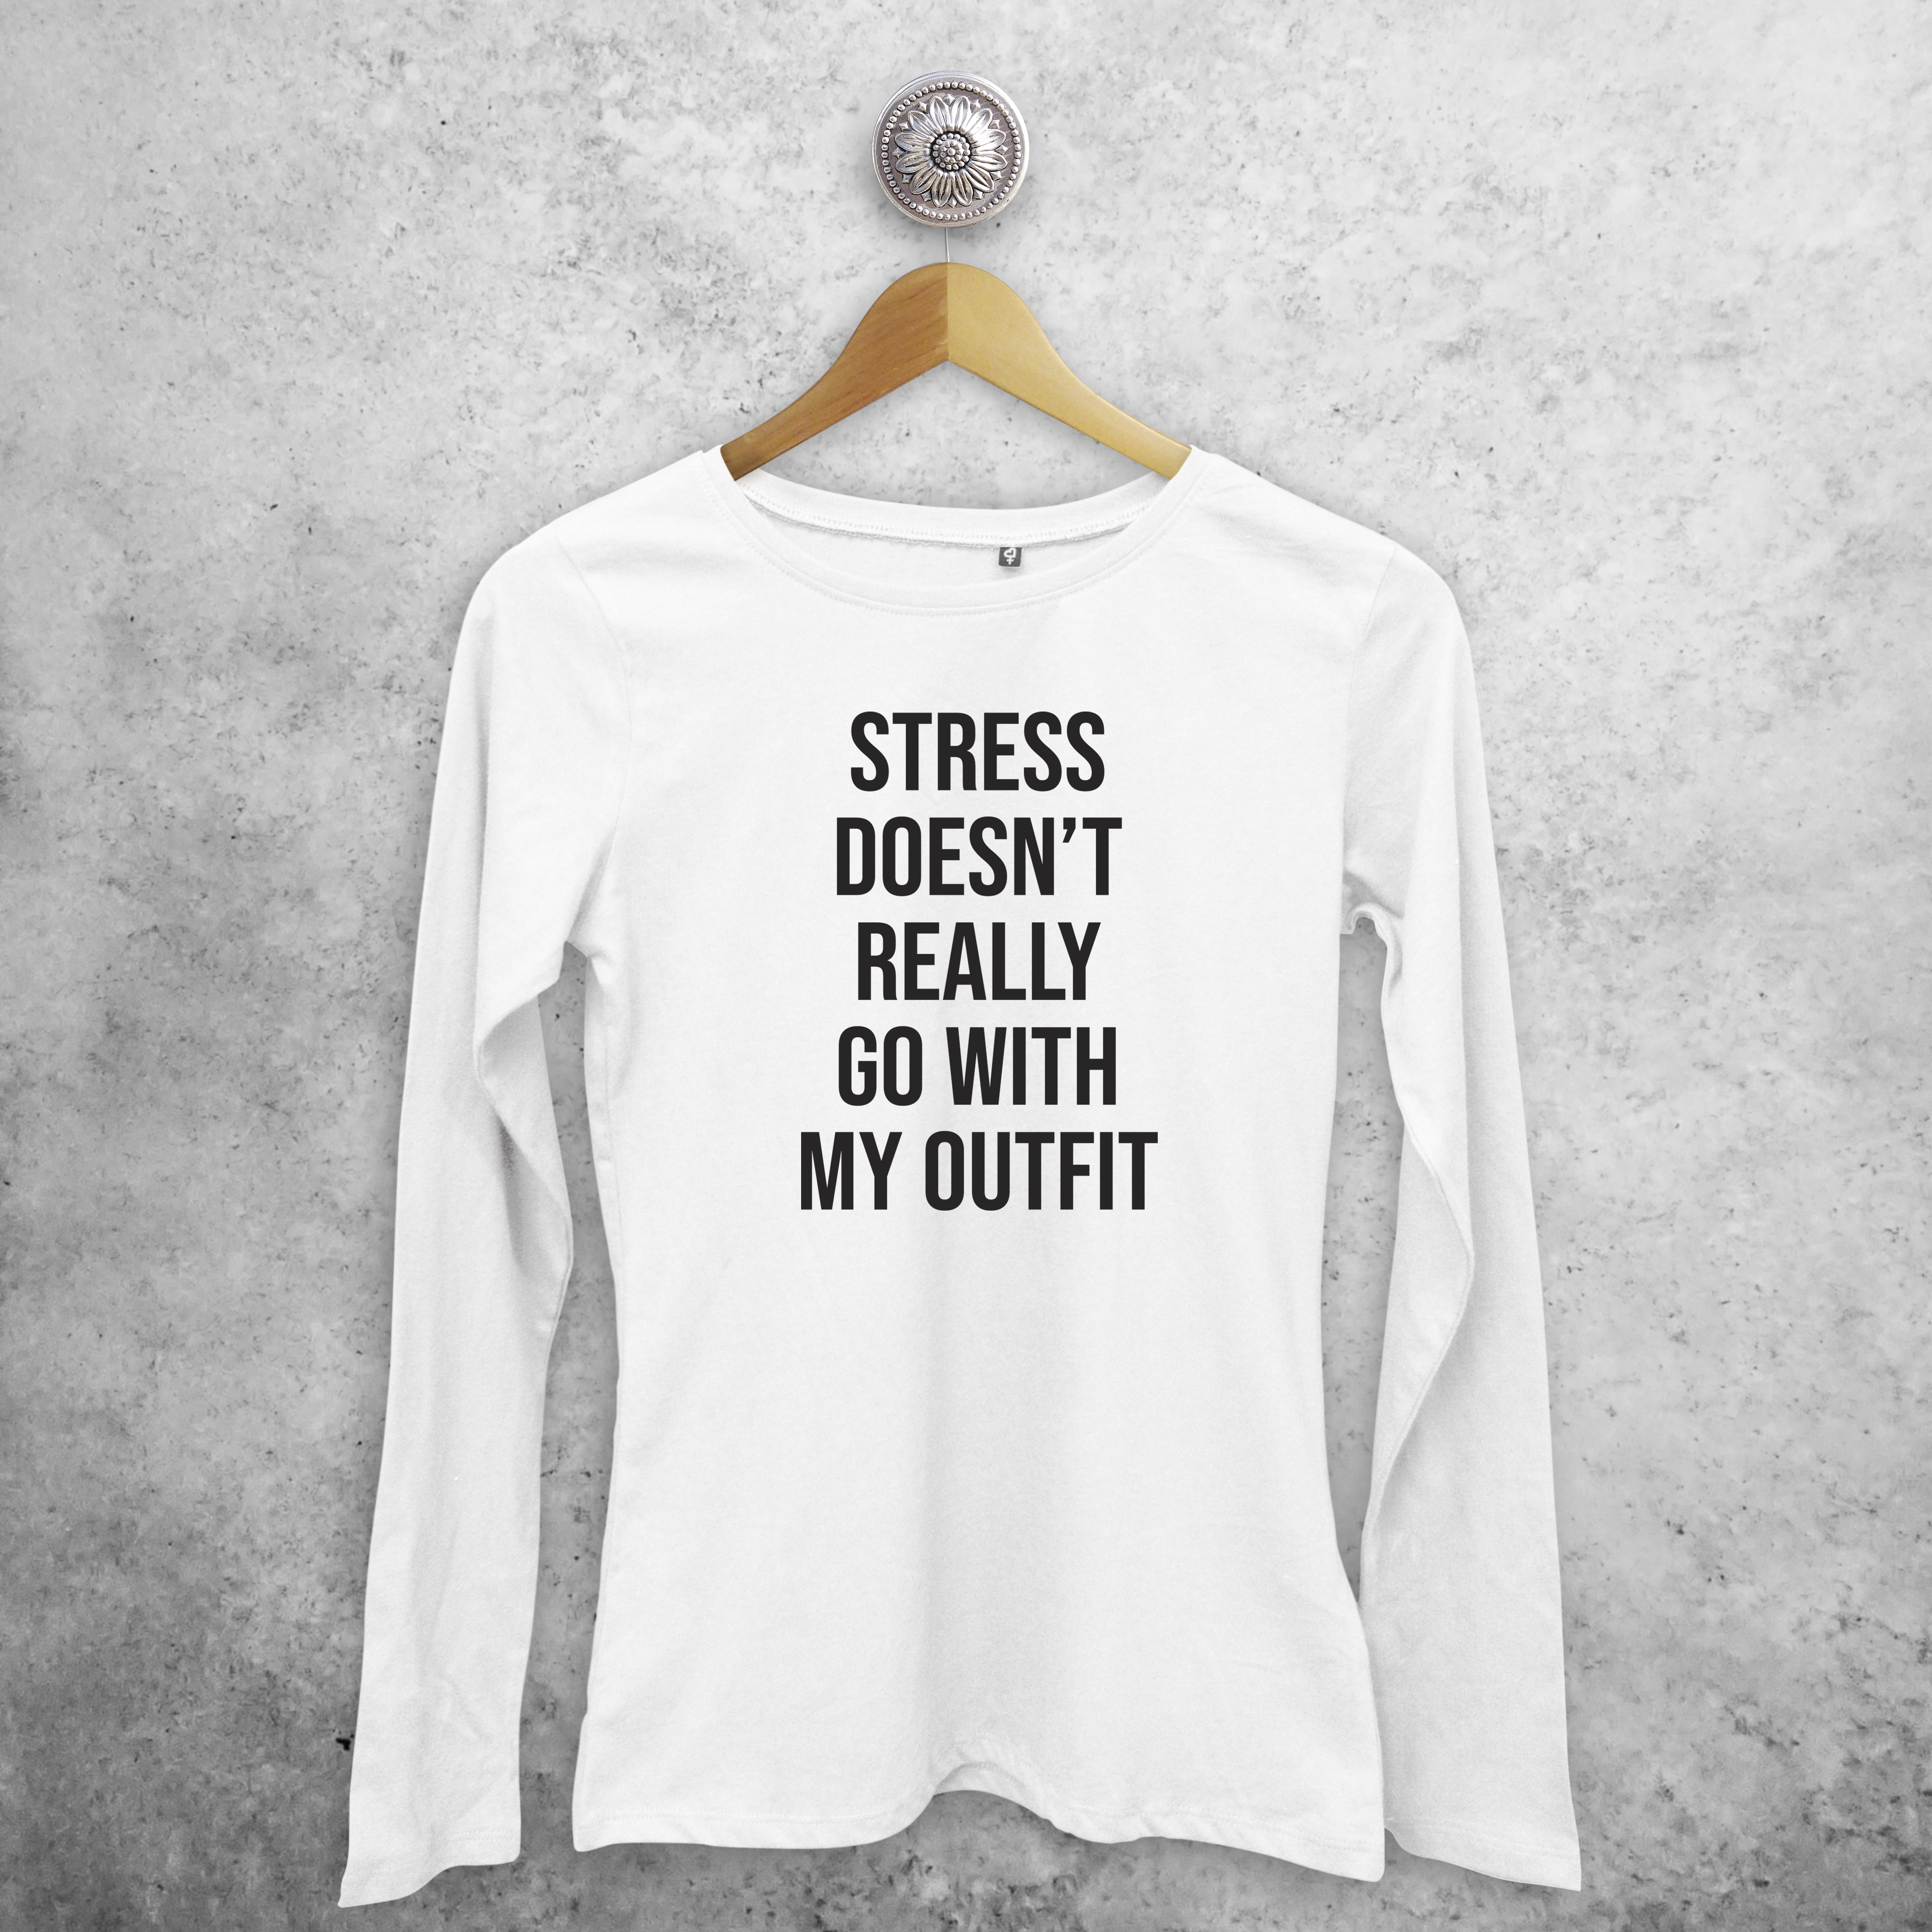 'Stress doesn't really go with my outfit' adult longsleeve shirt